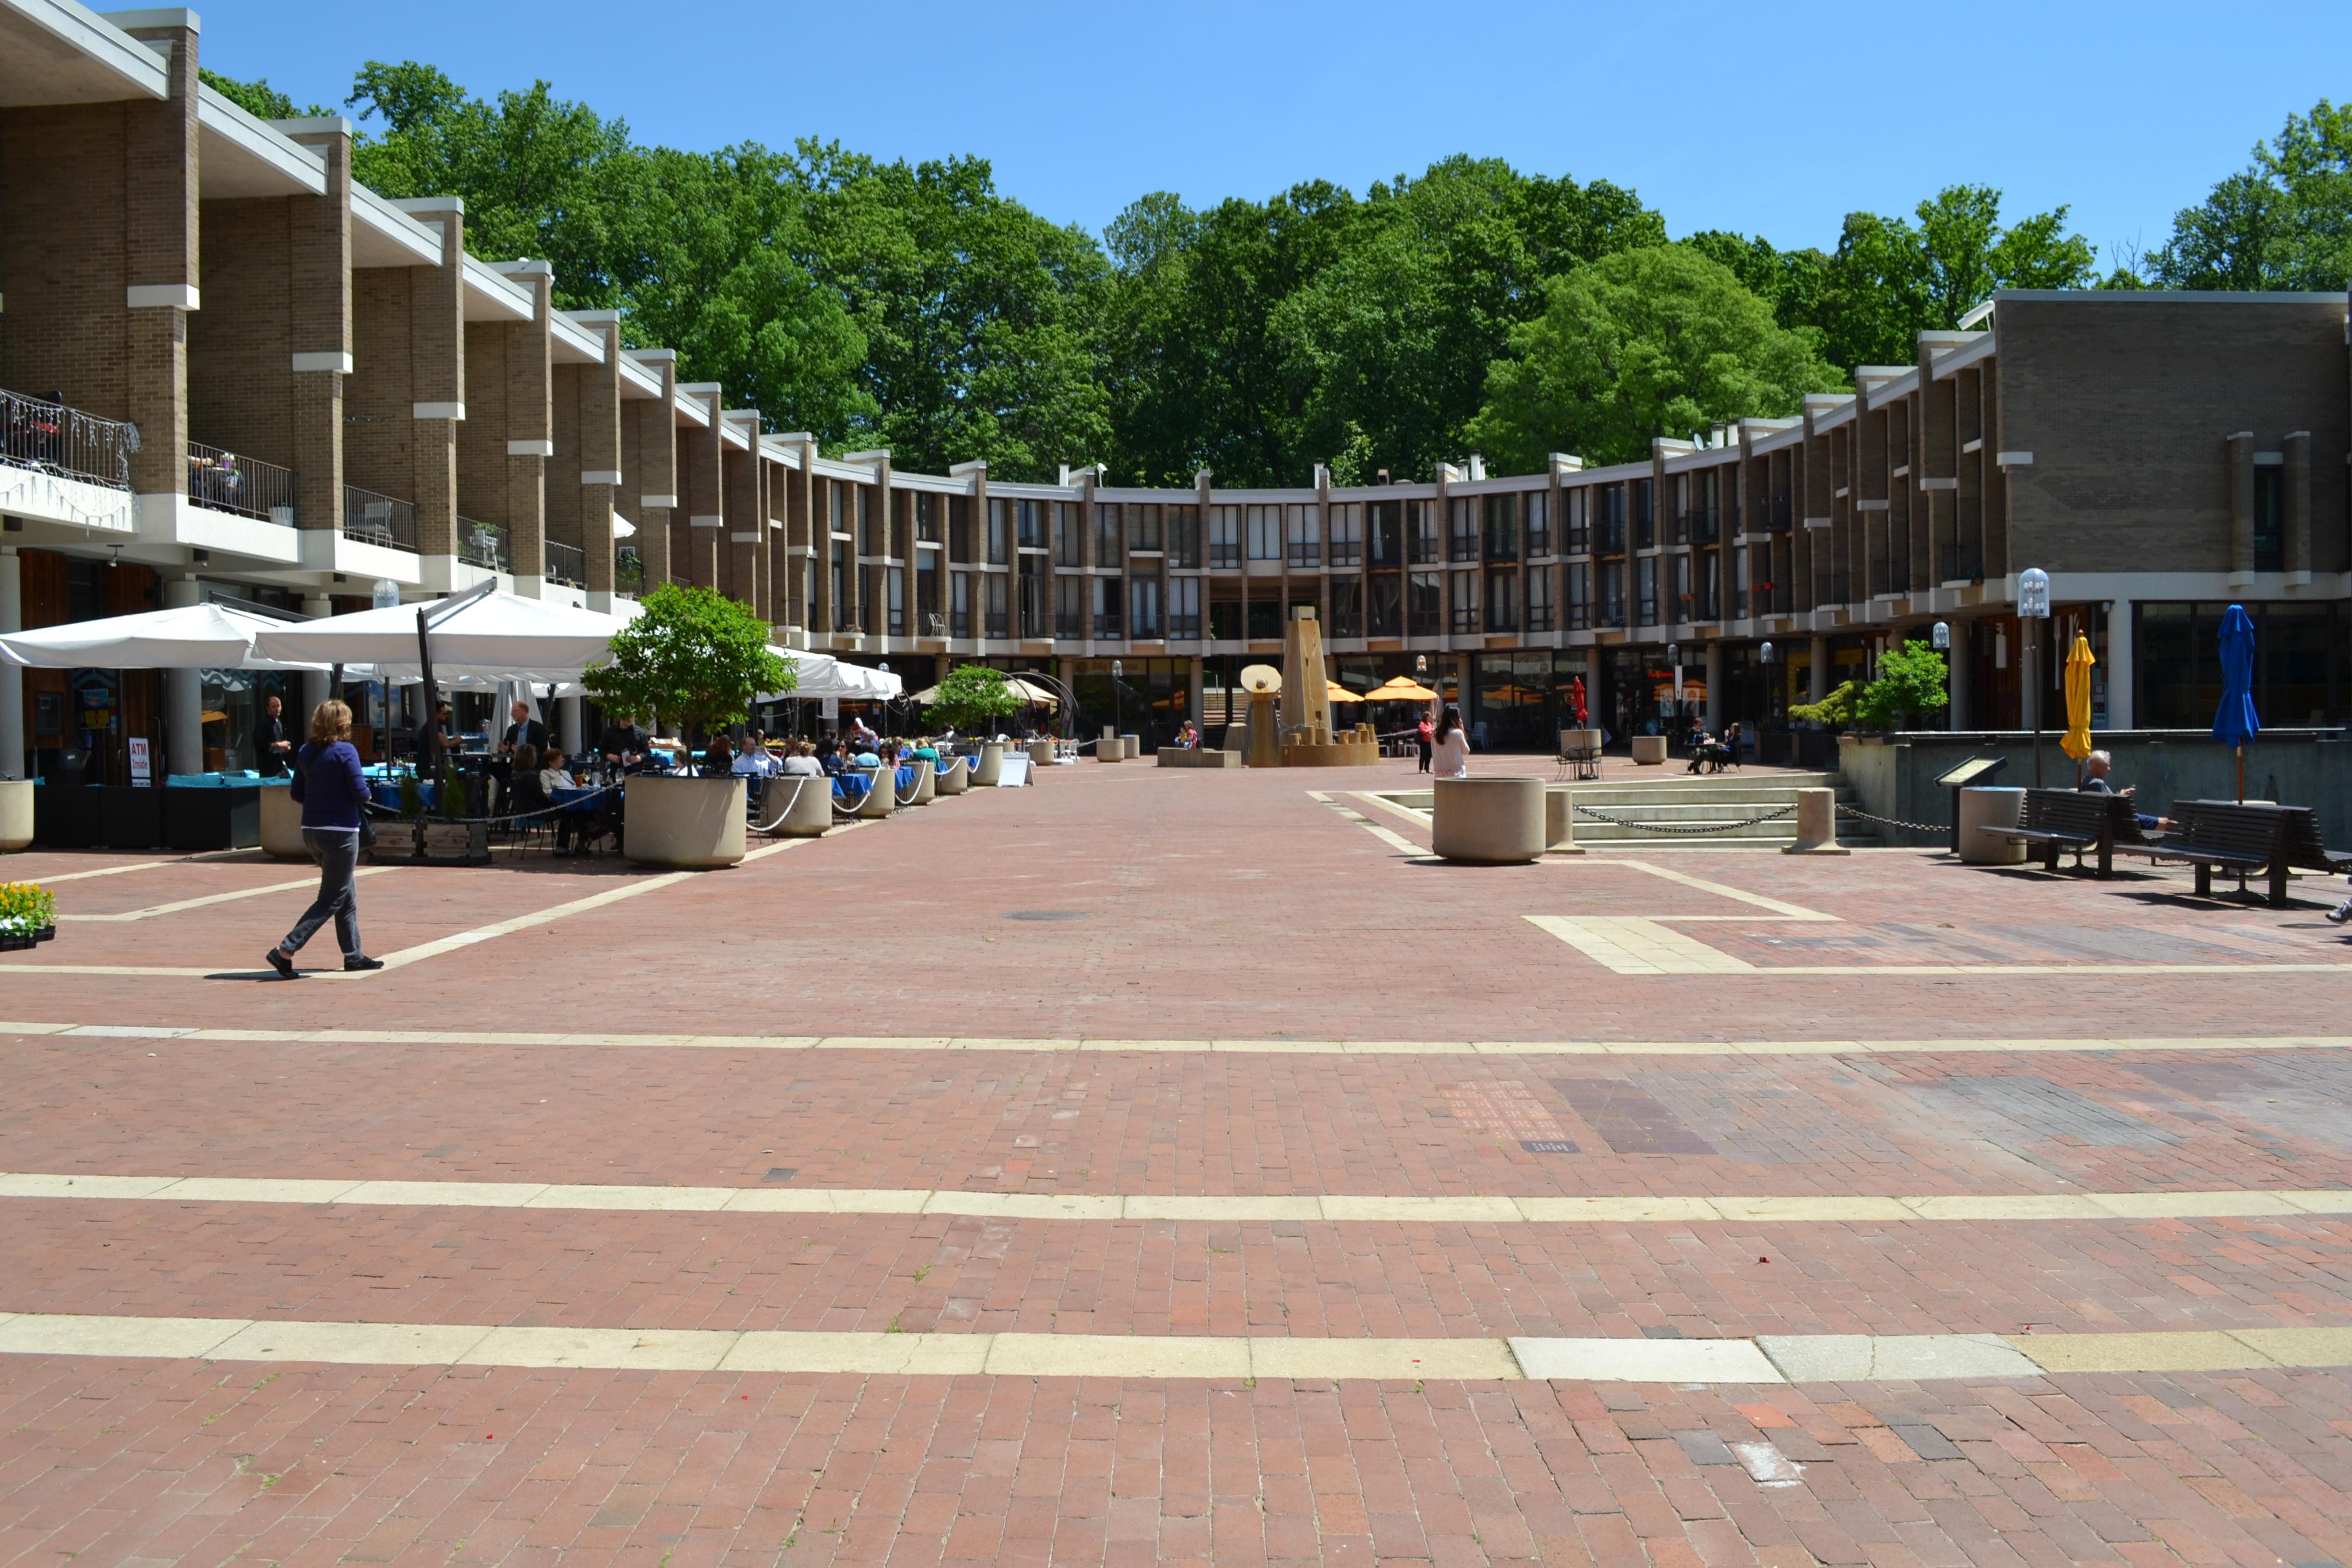 If you are looking for a great place to have an outdoor lunch in Reston  (away from the craziness of Reston Town Center) there are some great outdoor venues at Lake Anne.